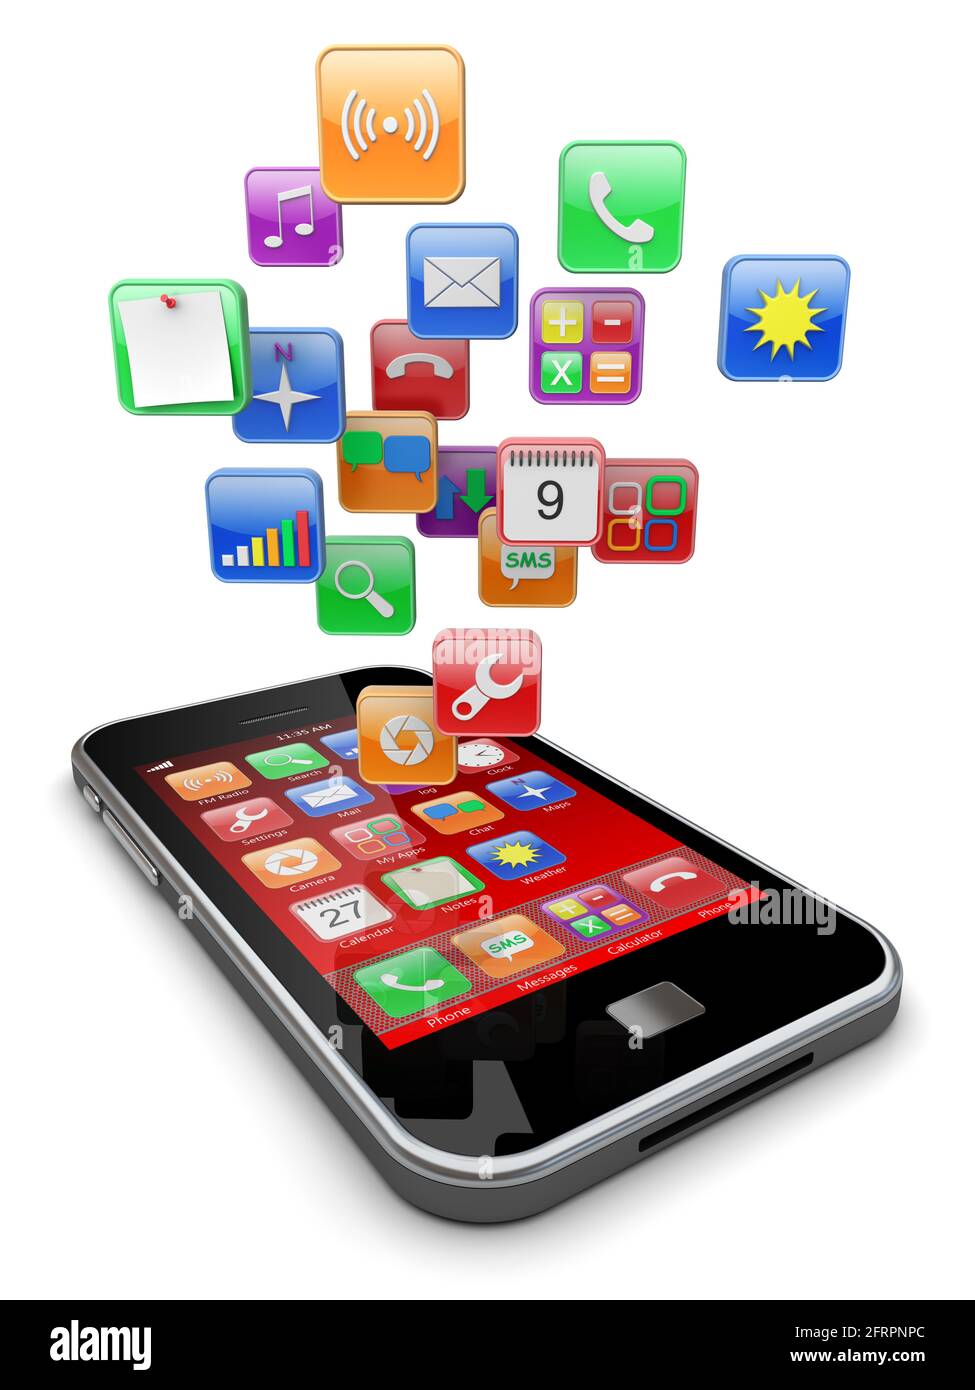 Mobile smart phone with red touch screen and software apps icons . 3d image  Stock Photo - Alamy